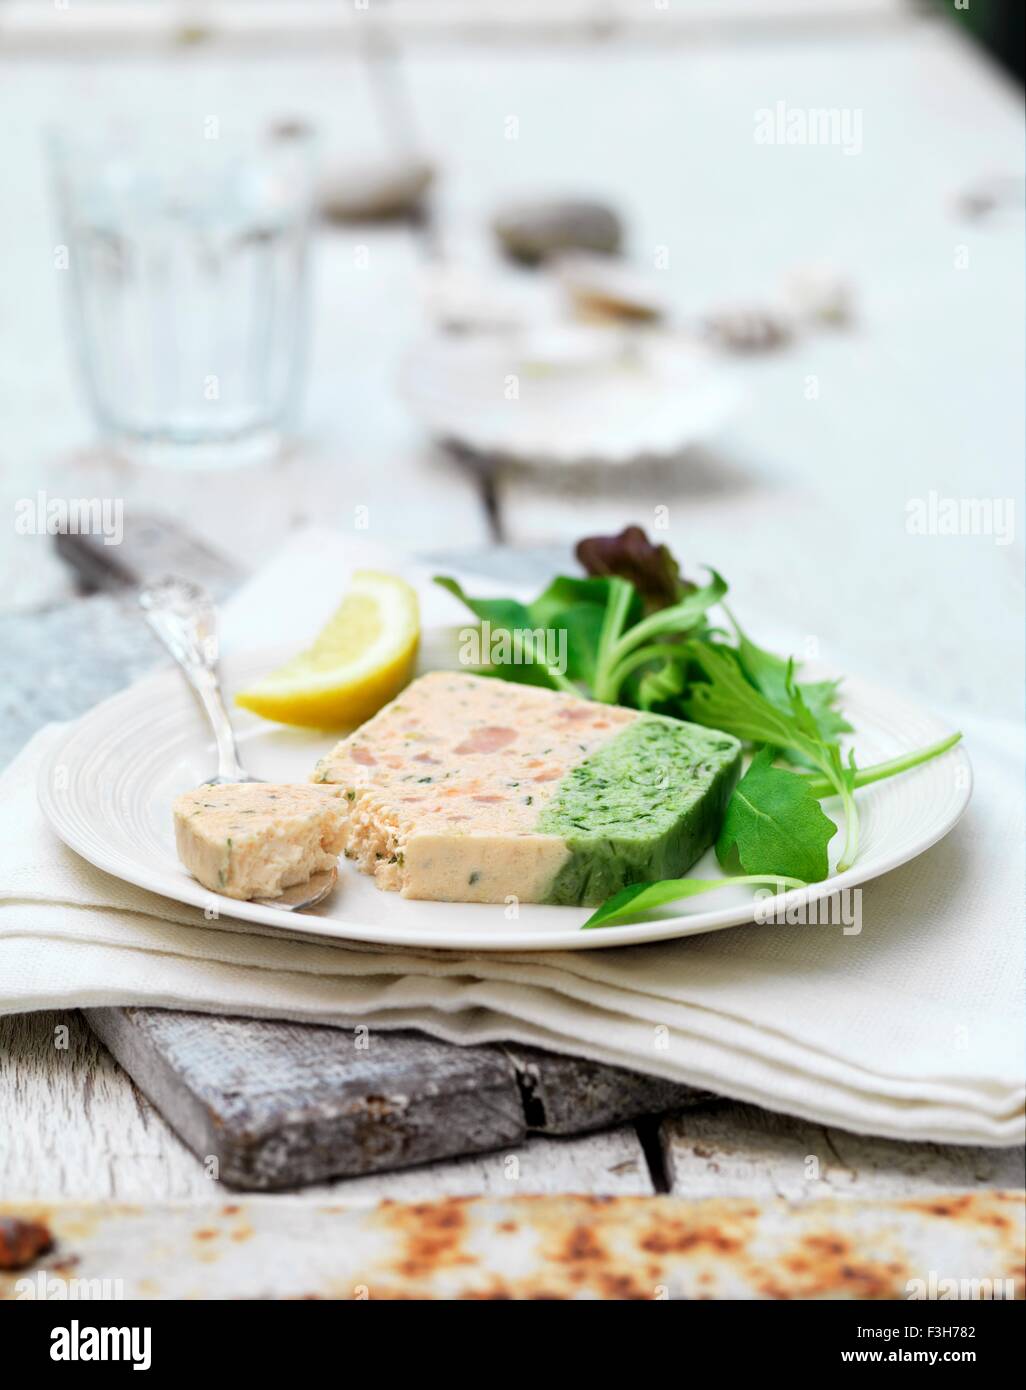 Still life of prawn and asparagus terrine slice and salad leaves with lemon Stock Photo